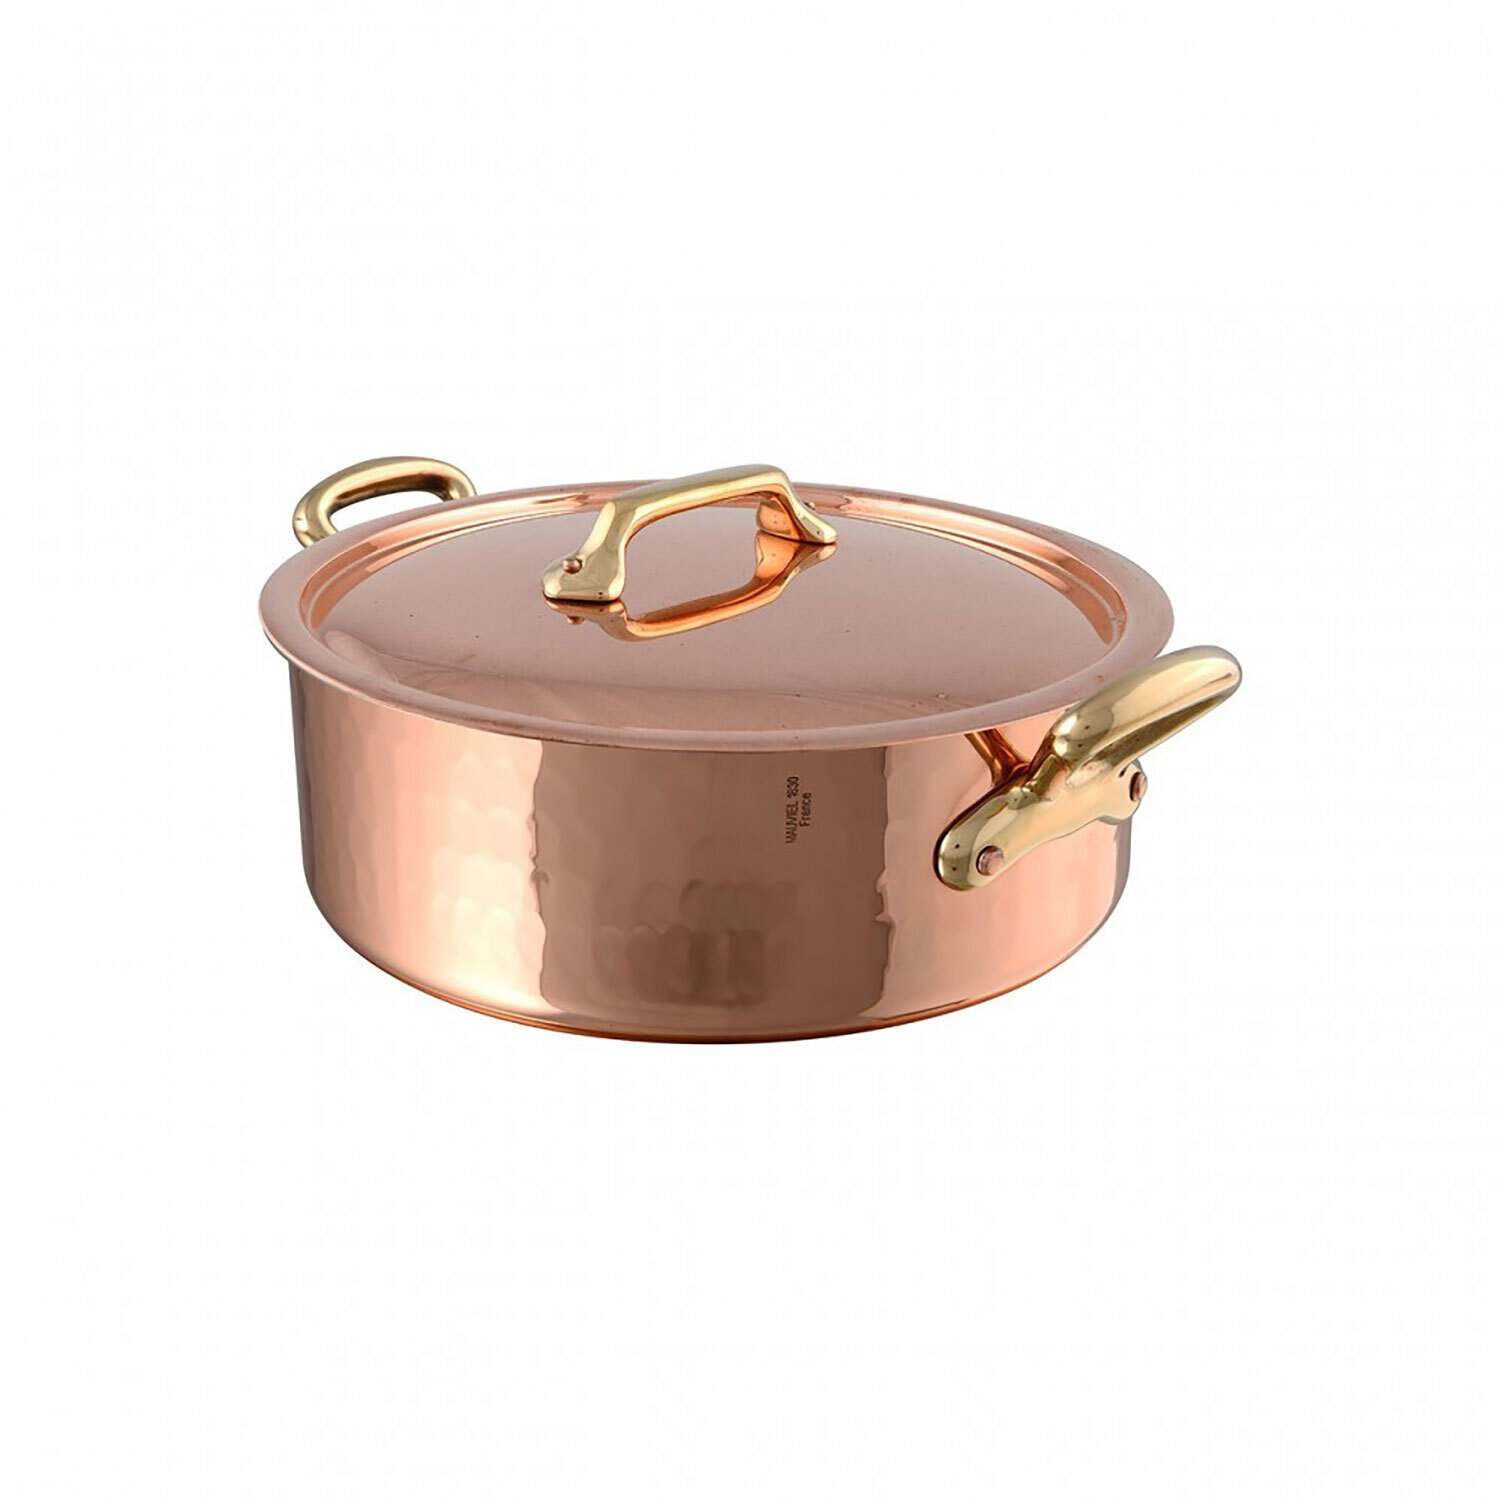 Mauviel M'Tradition Hammered Copper Rondeauwith Lid And Bronze Handles Tin Inside 32cm 215232